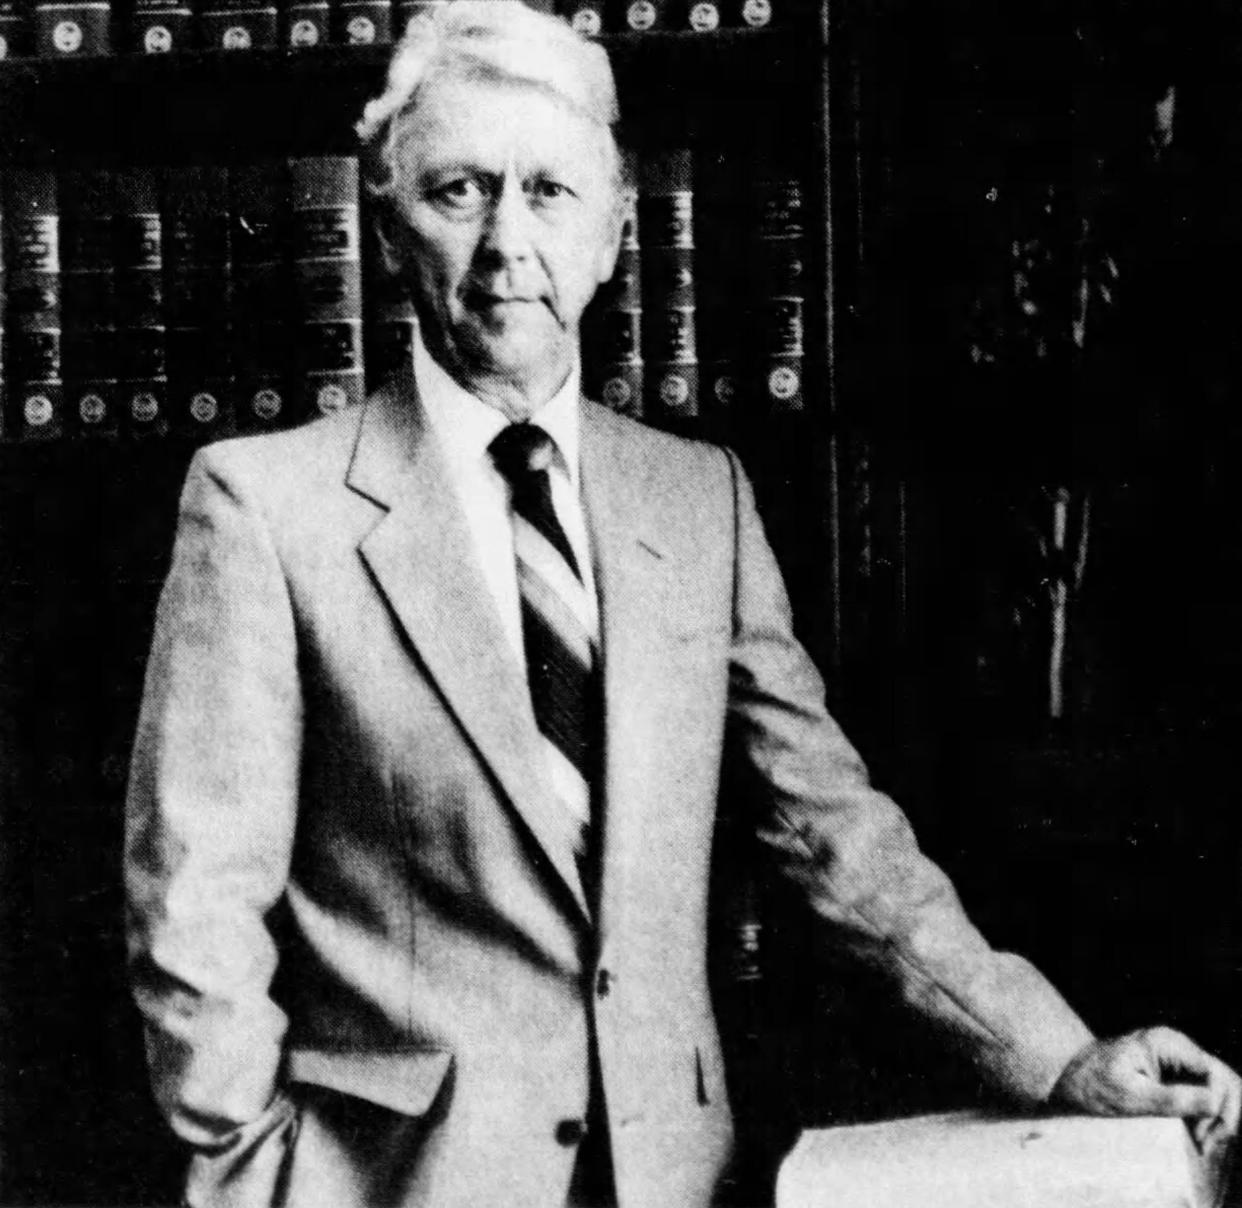 Oregon Supreme Court Chief Justice Edwin J. Peterson in a photograph published in the Statesman Journal in 1983.